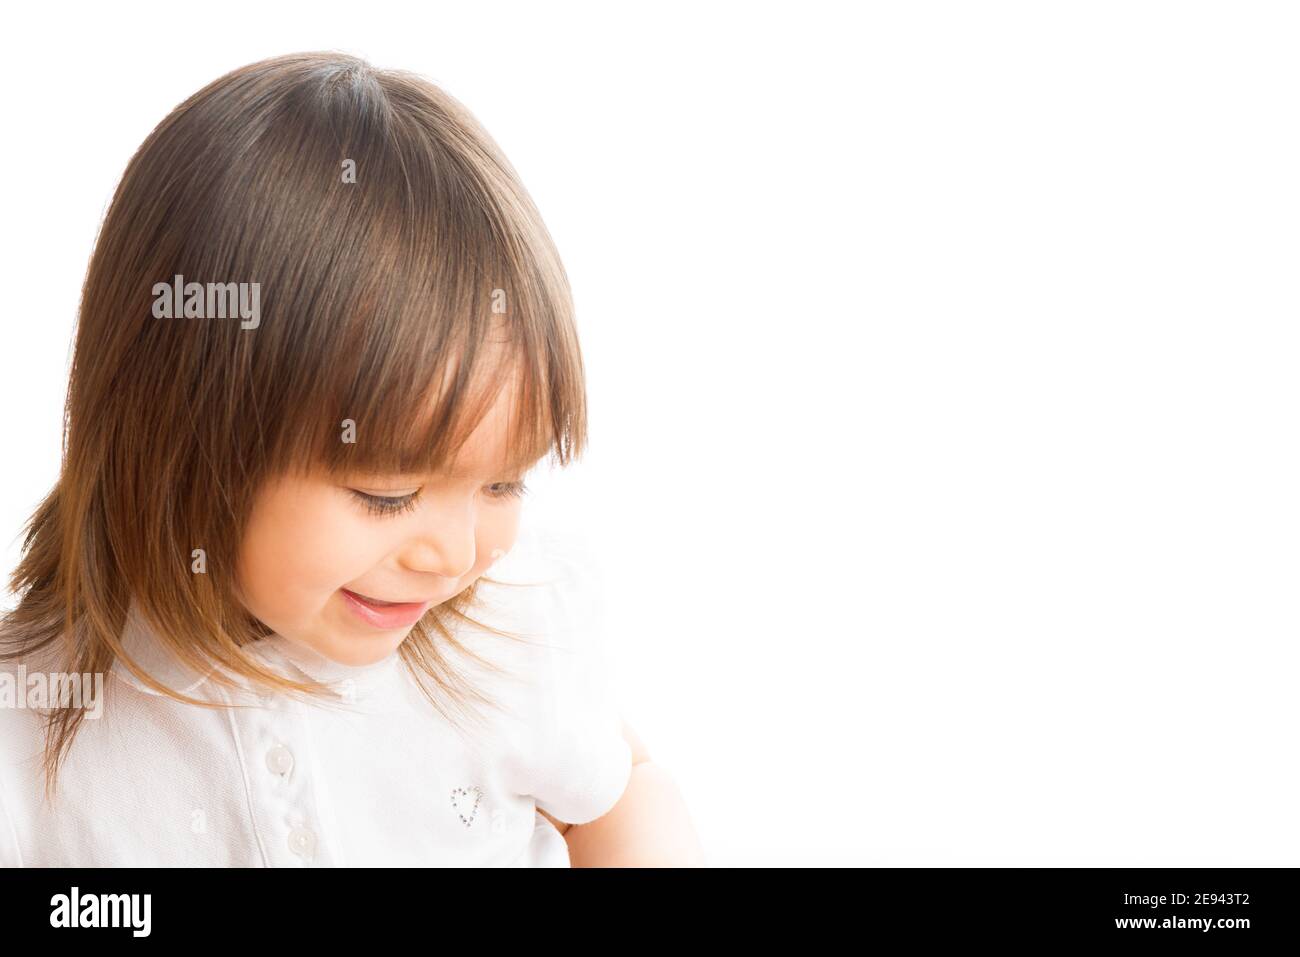 Two years old girl smiling looking down. Stock Photo